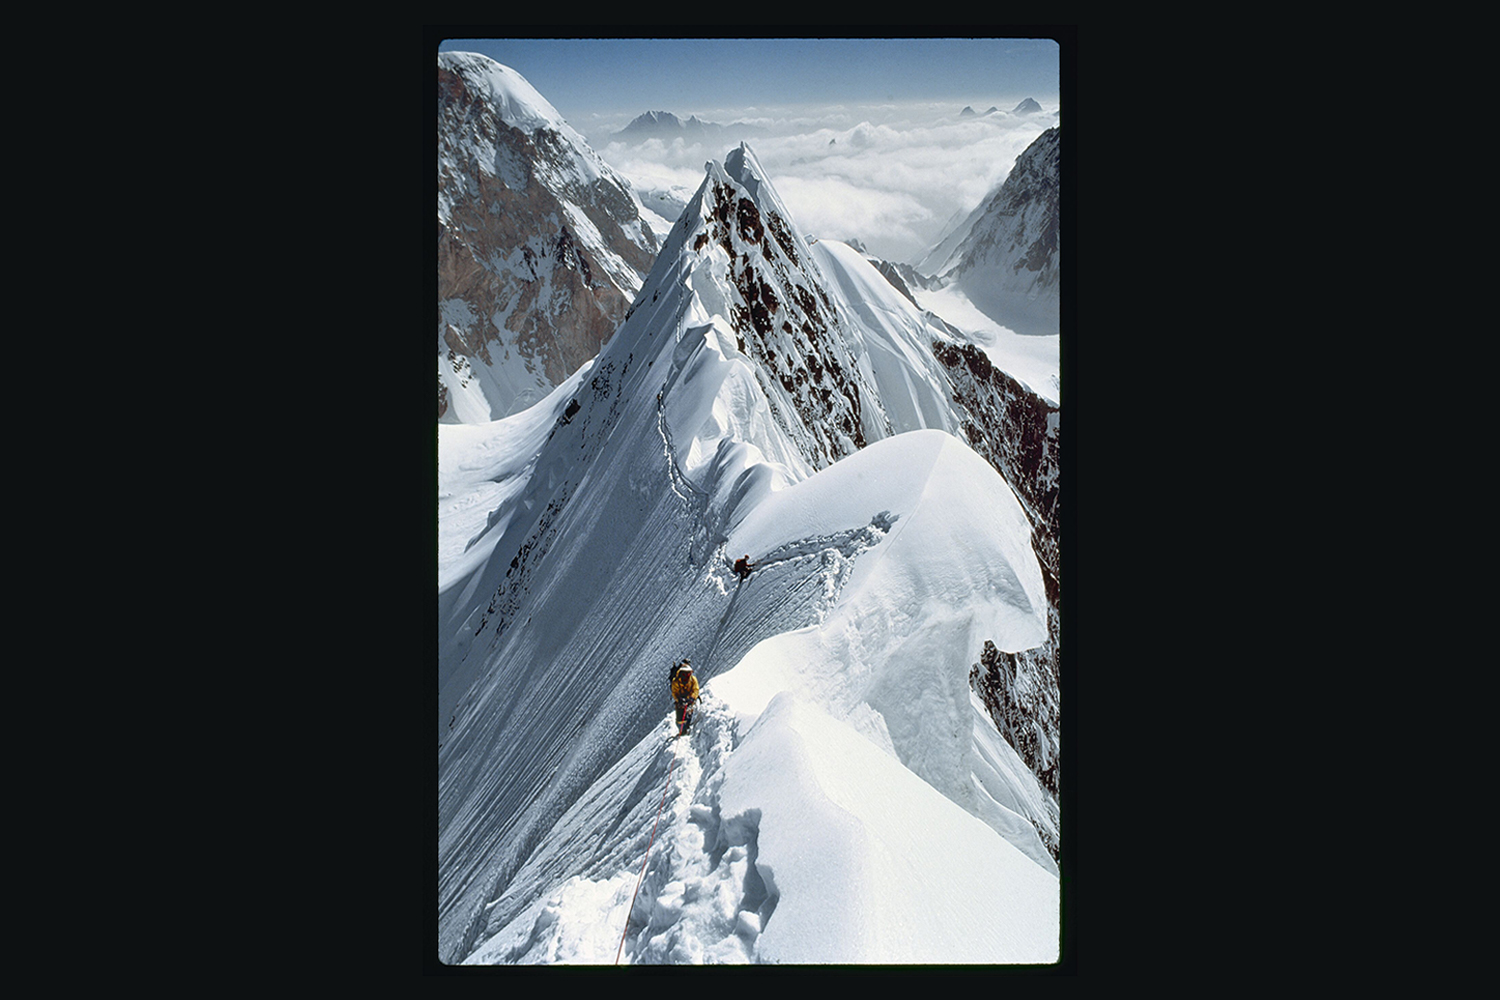 Rick Ridgeway on the northeast ridge, or knife-edge, of the mountain K2, with Lou Reichardt in the background